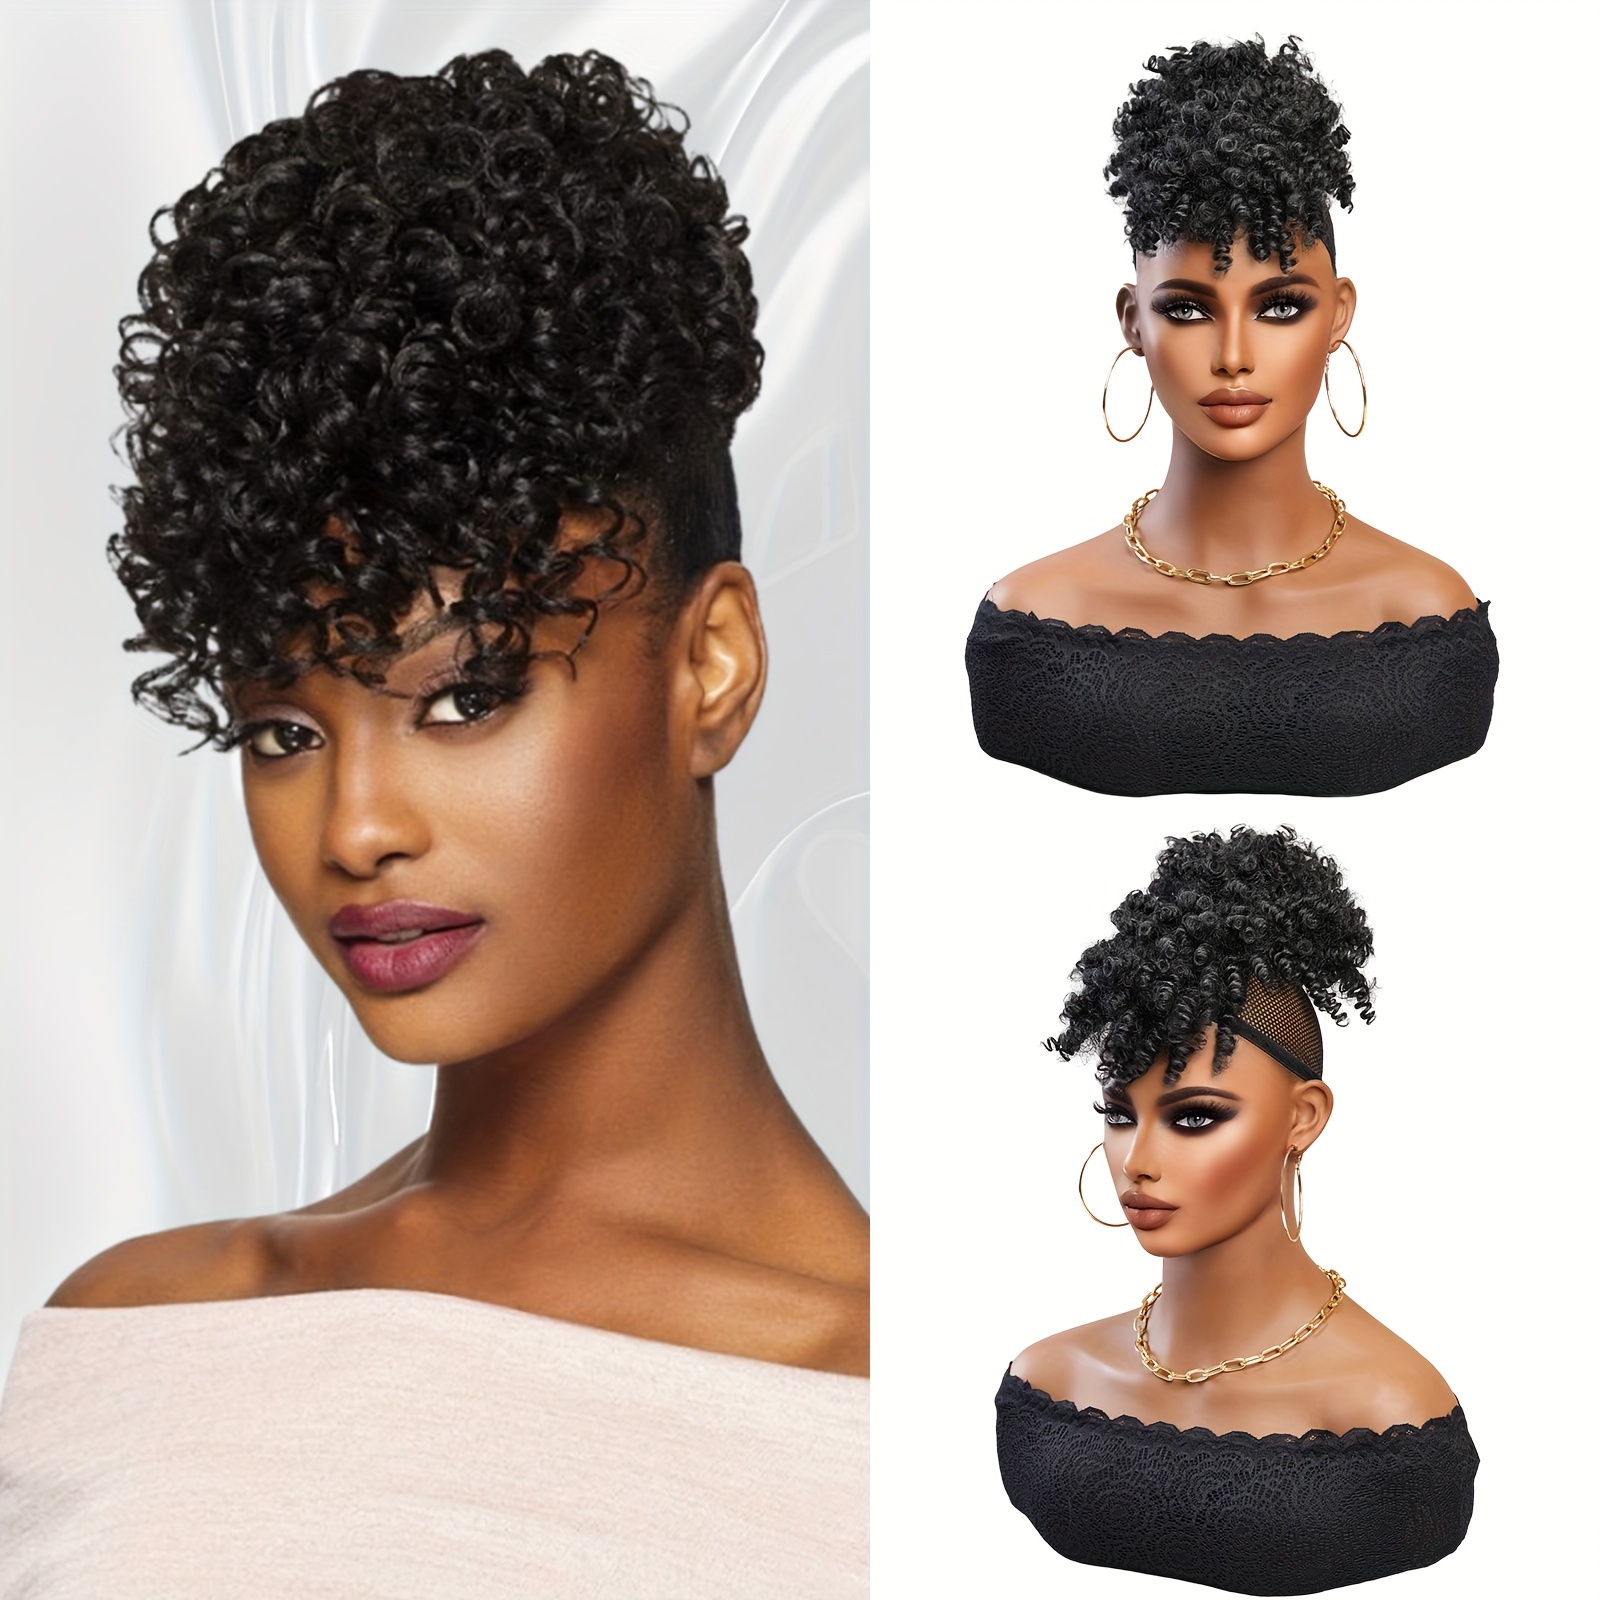 Shop: Kit Completo Capelli Afro